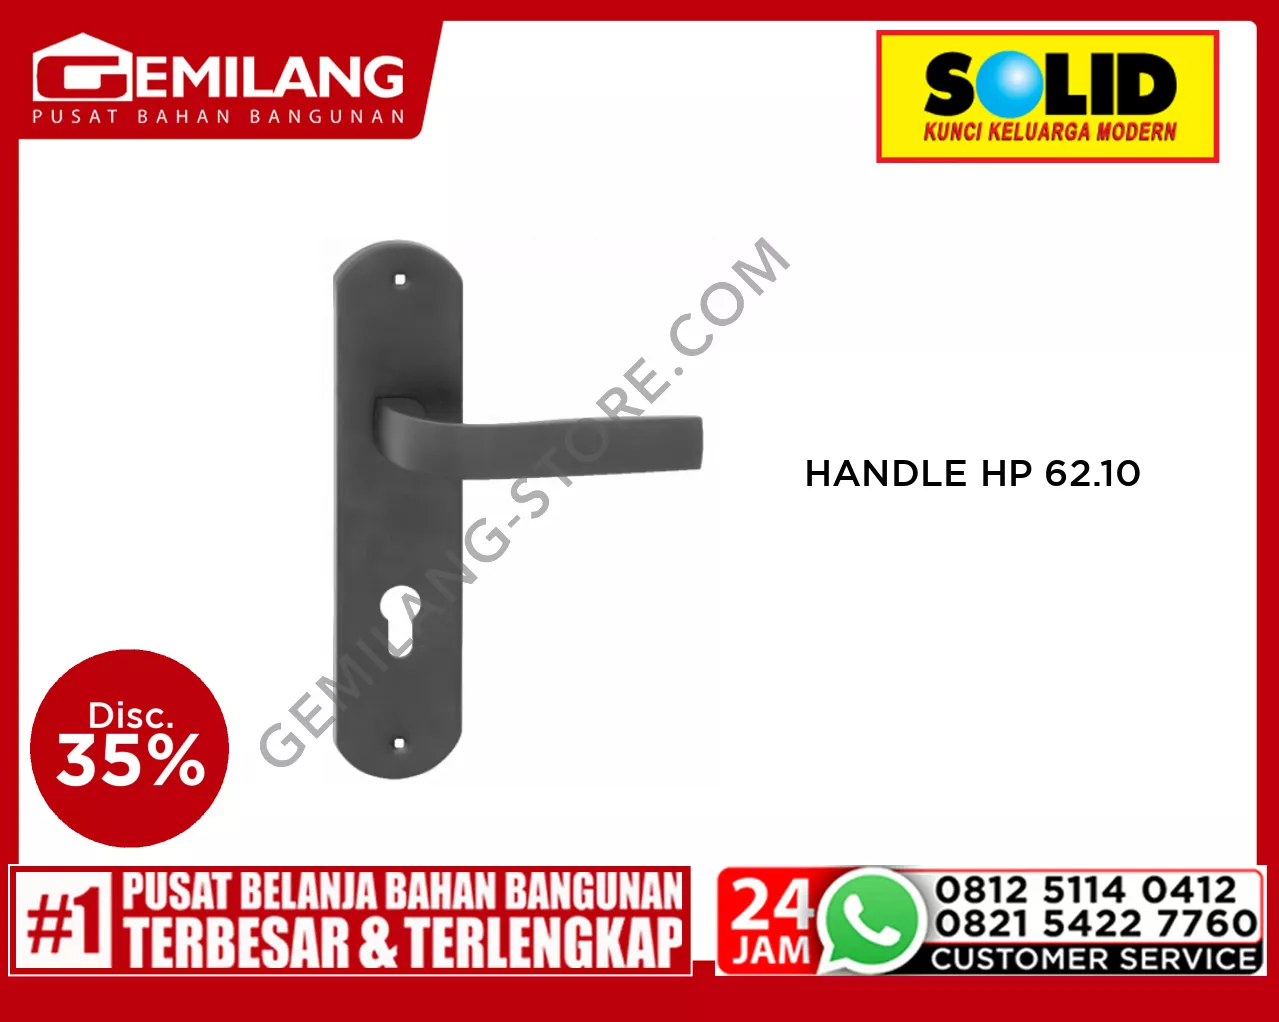 SOLID HANDLE HP 62.10 BL